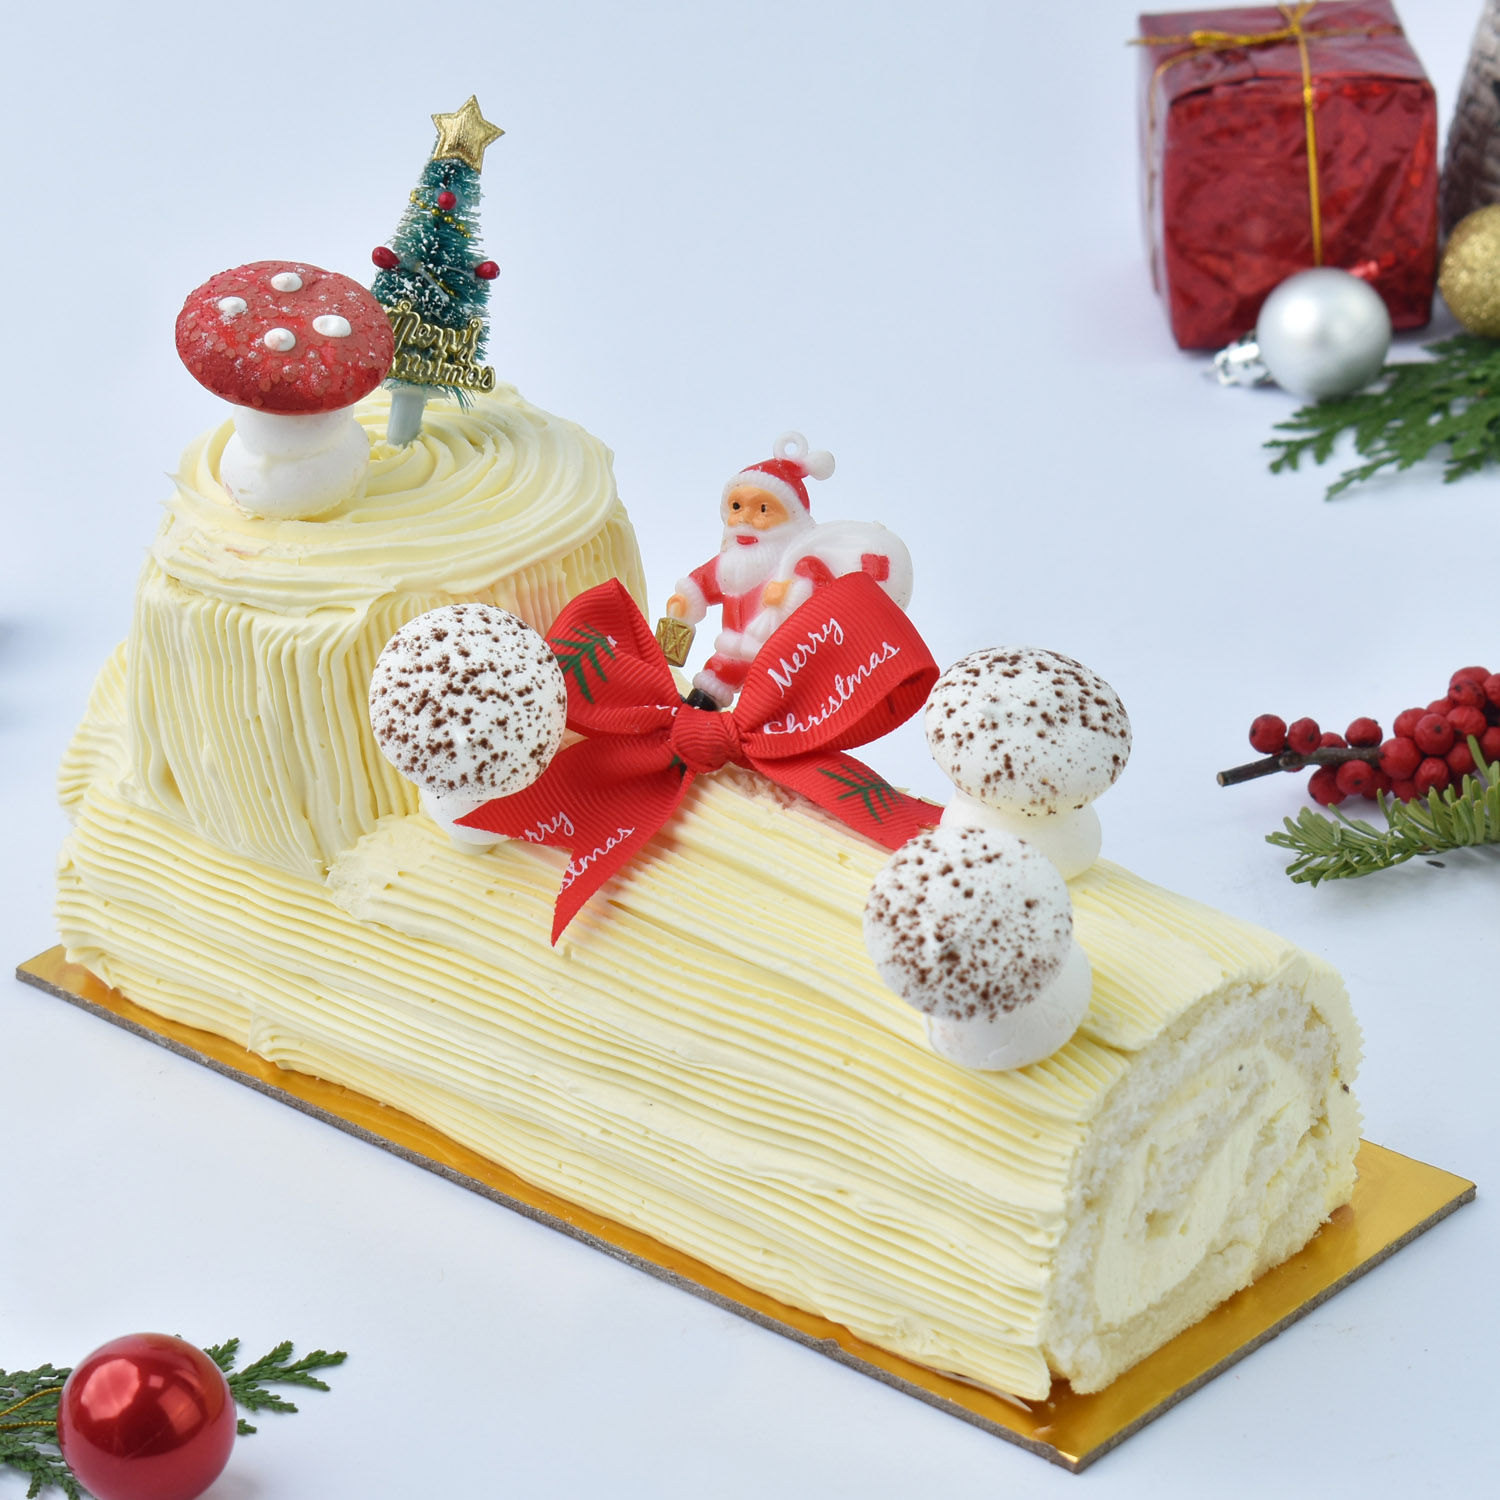 Online Merry Christmas Vanilla Log Cake 1 Kg Gift Delivery in UAE - FNP